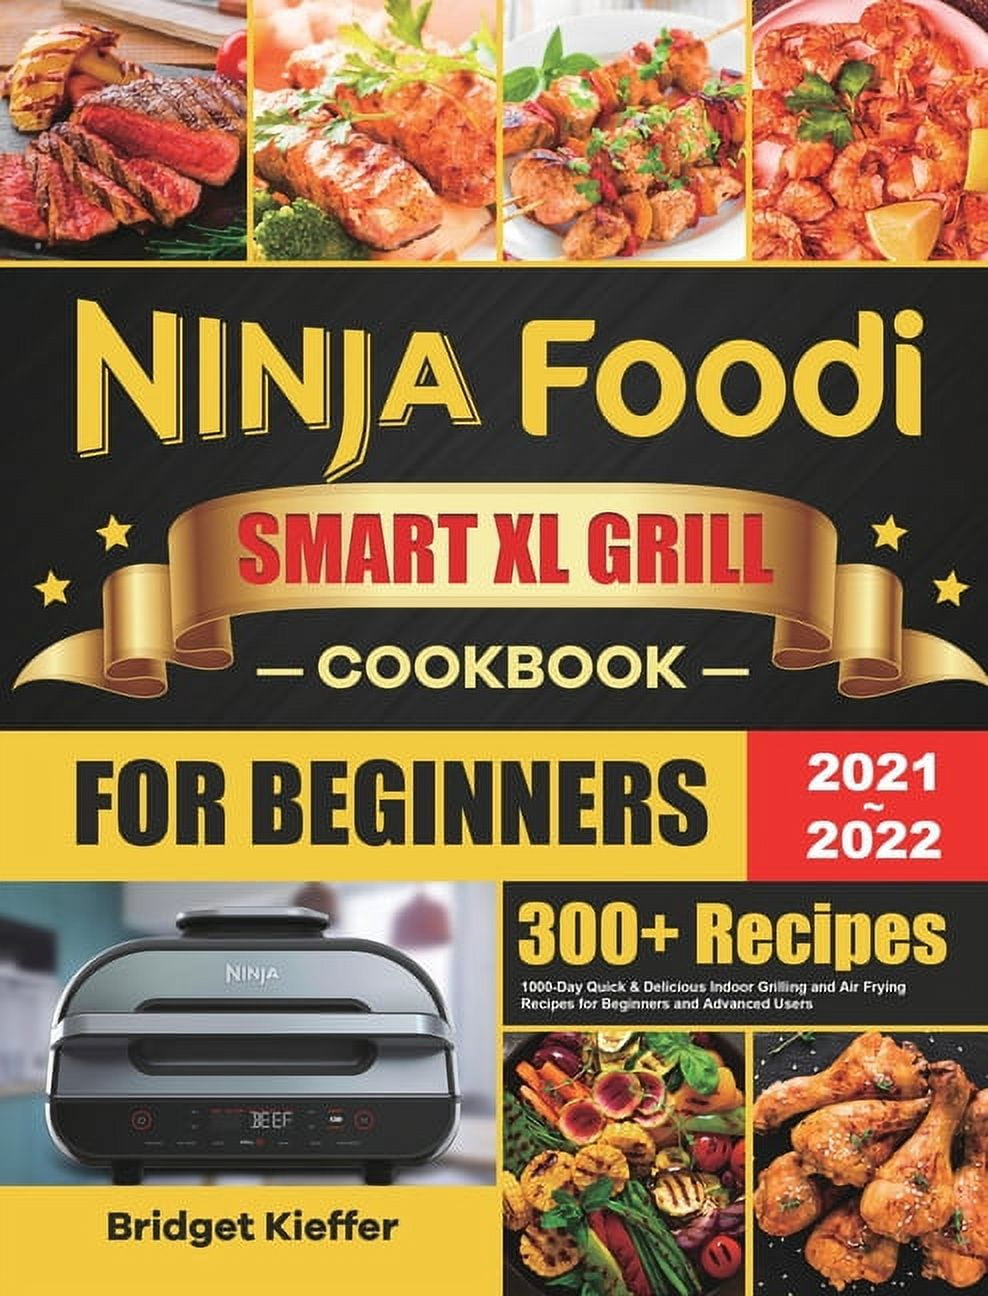 Ninja Foodi Grill Cookbook for Beginners 2022: 1000 Easy, Delicious and Affordable Recipes for Indoor Grilling and Air Frying [Book]